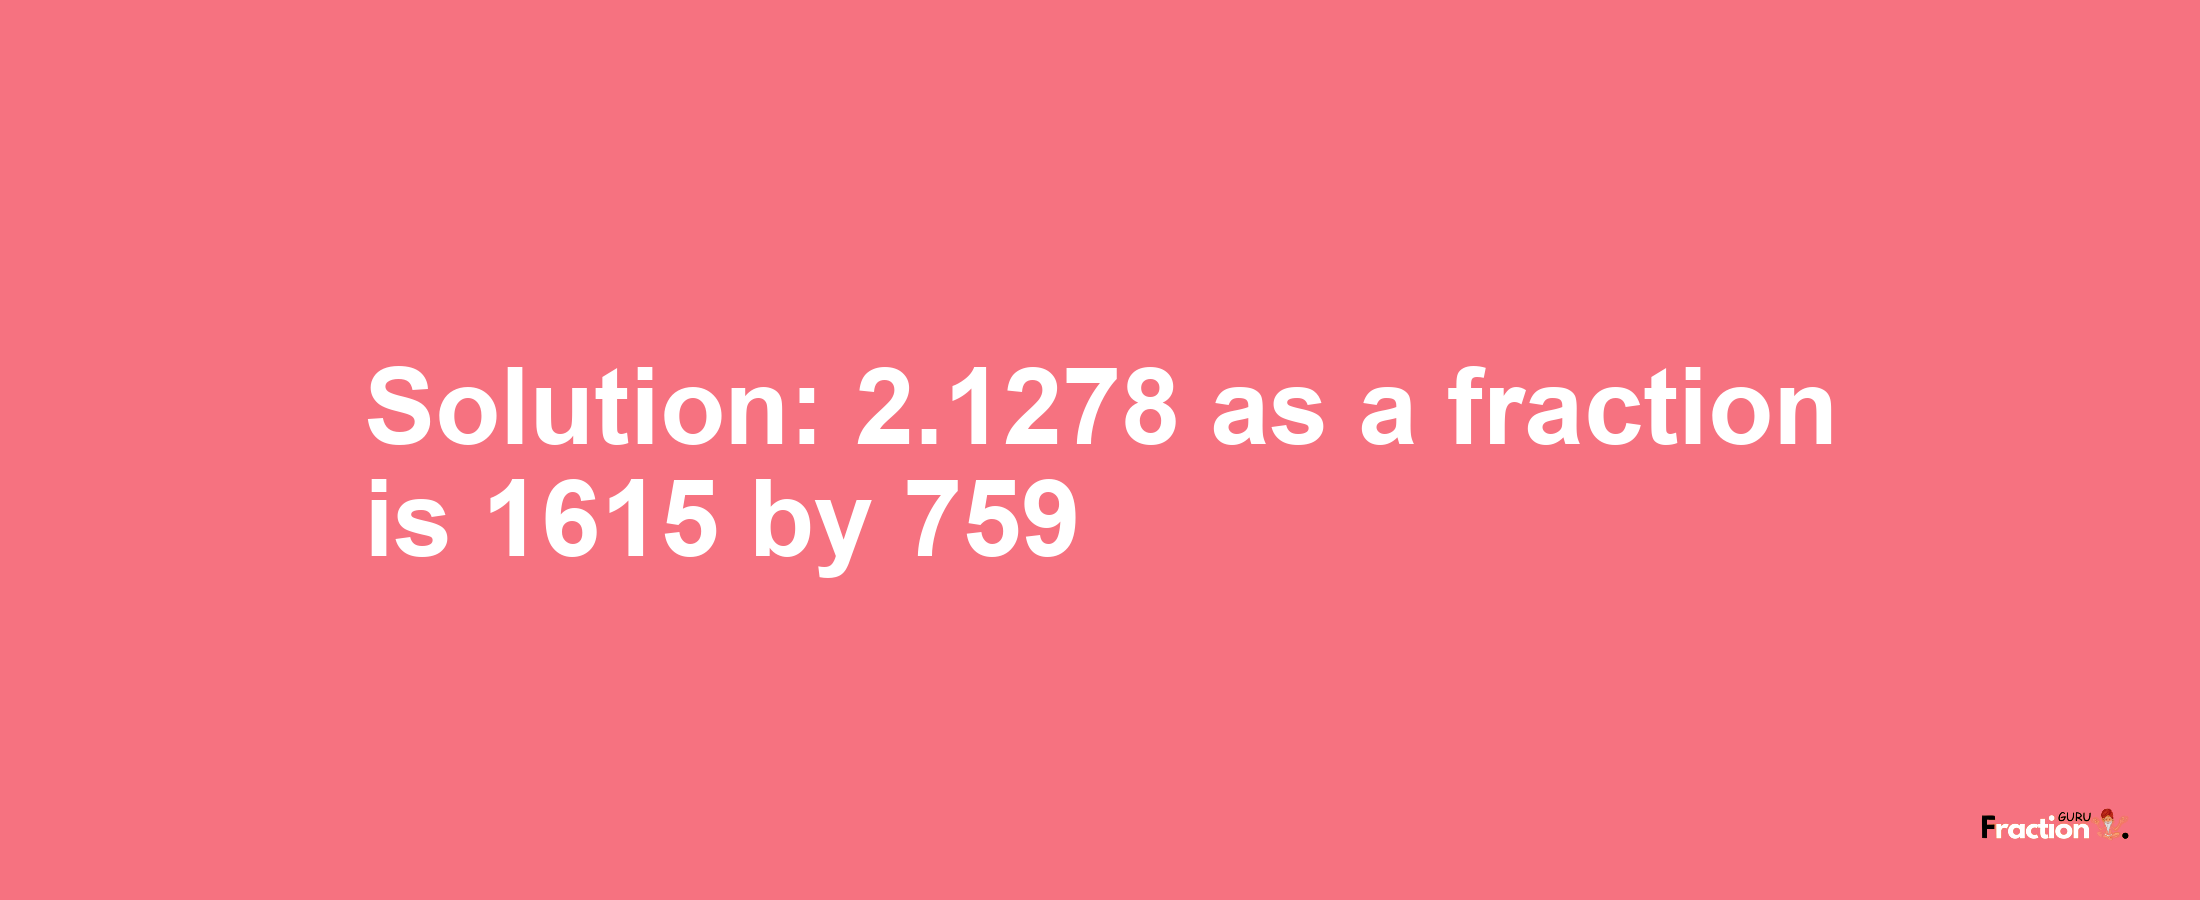 Solution:2.1278 as a fraction is 1615/759